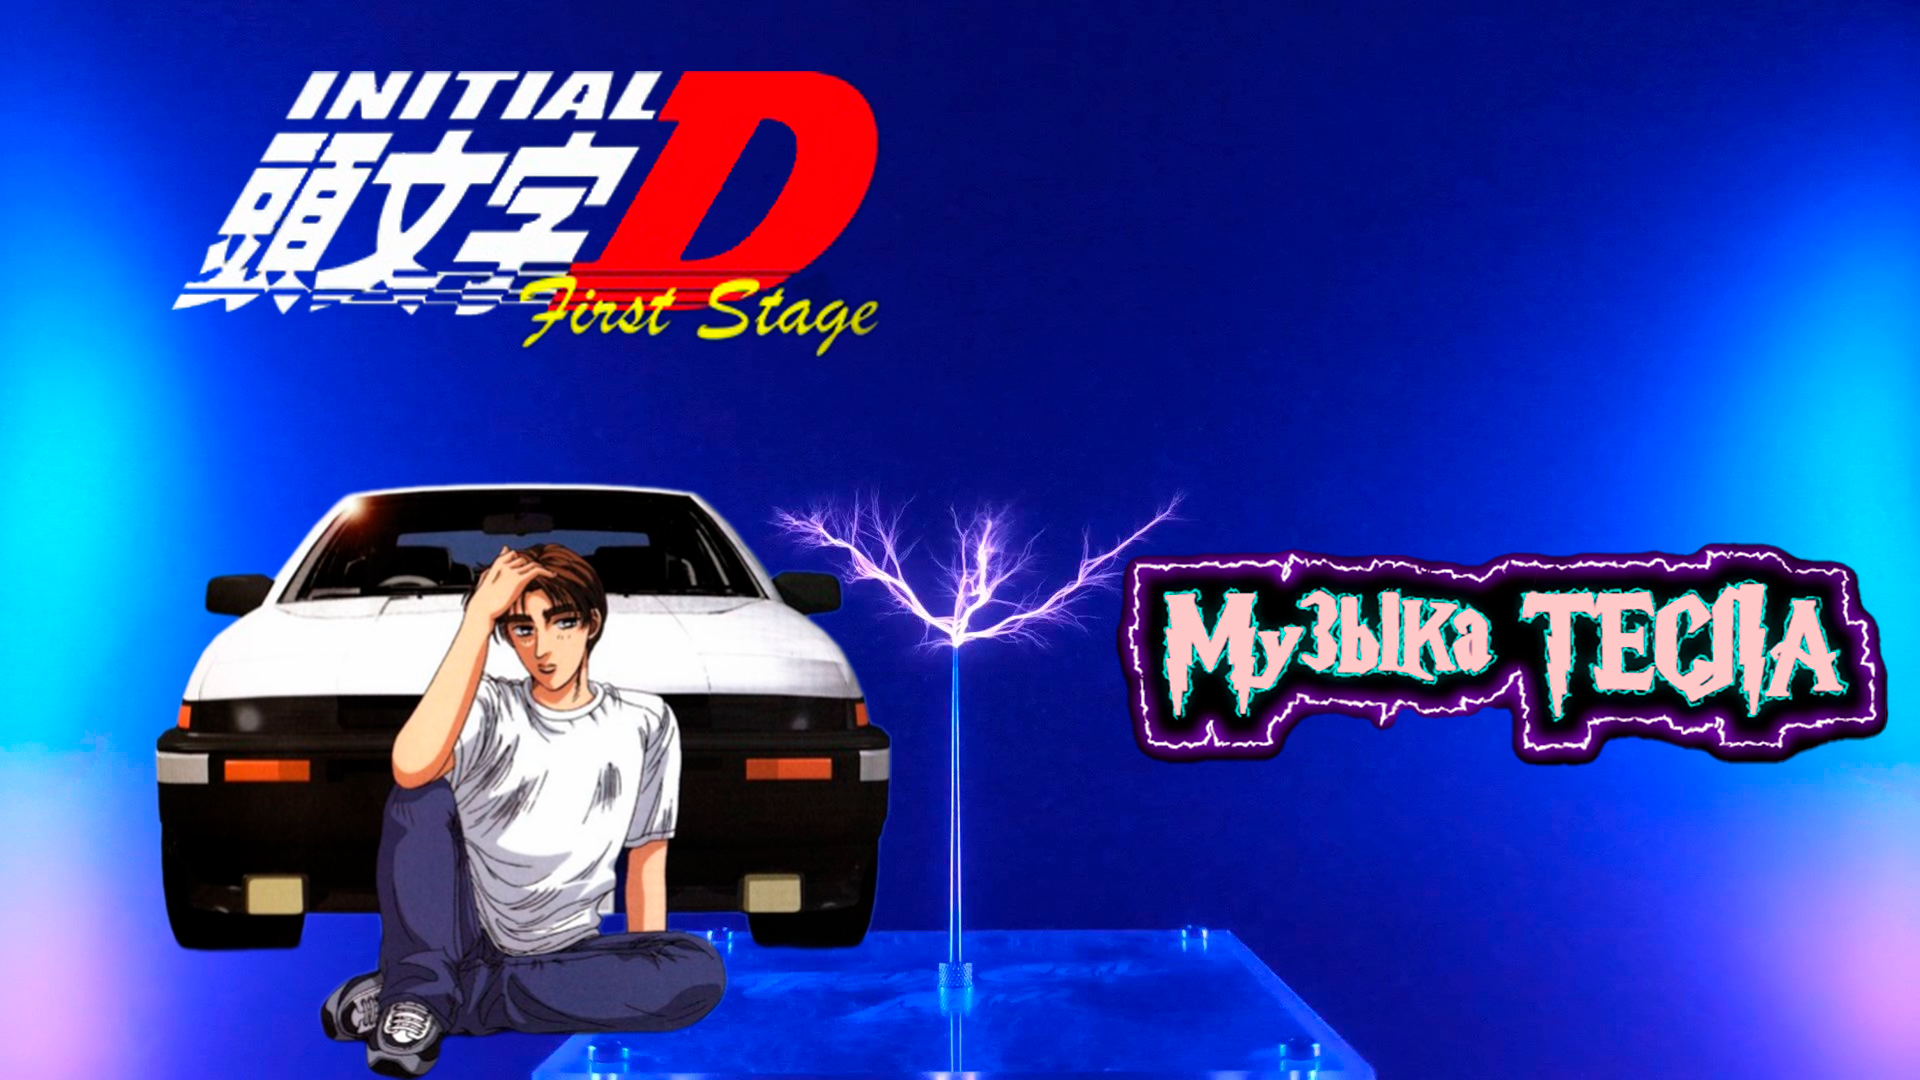 Running In The 90's - Initial D First Stage Tesla Coil Mix #музыкатесла